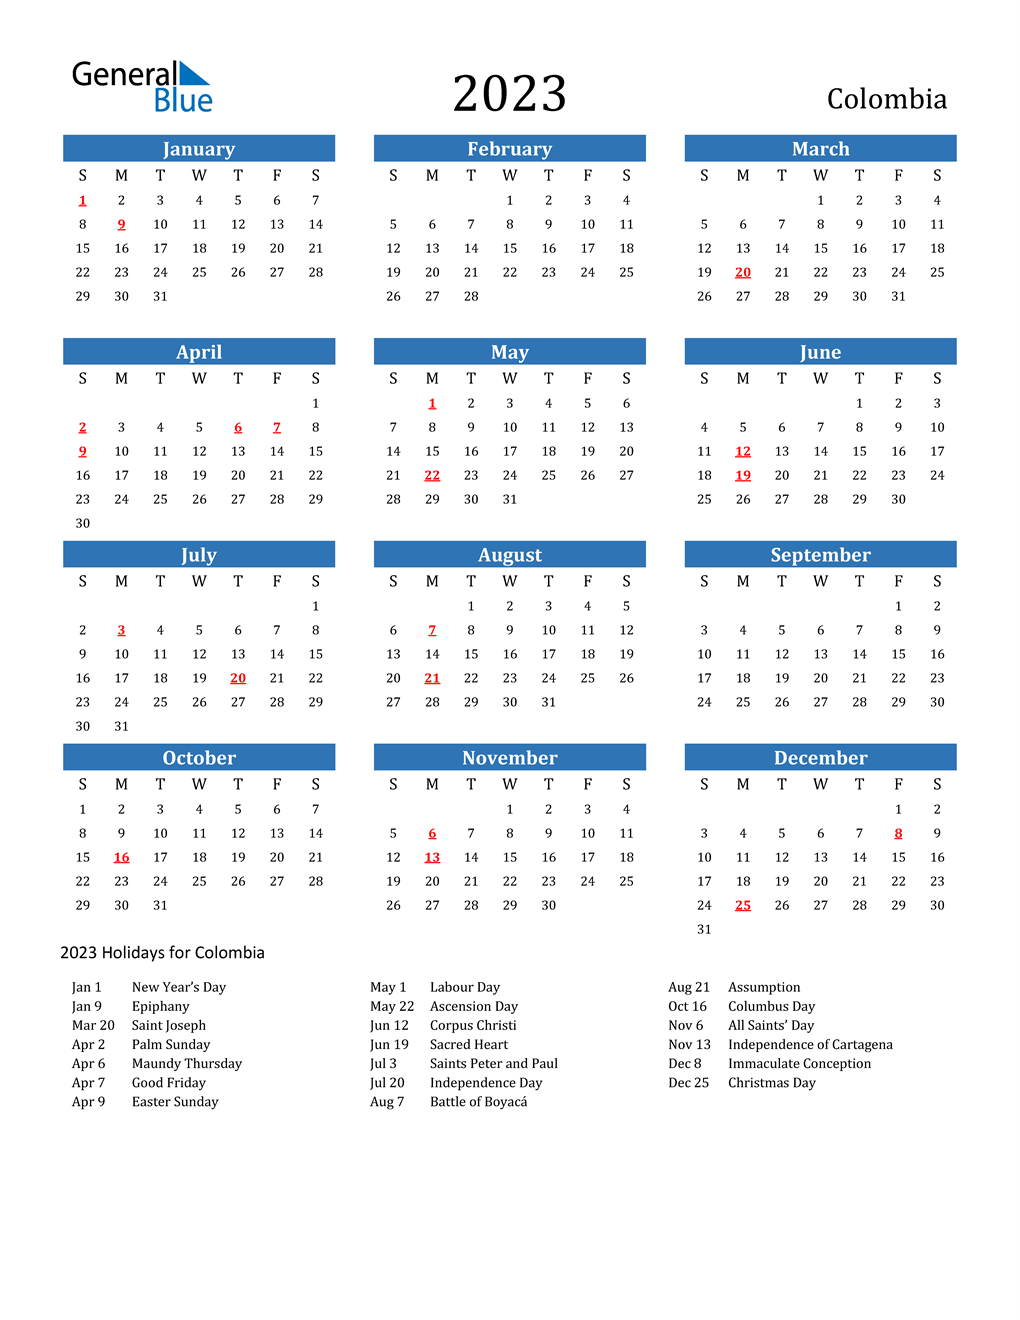 Colombia 2023 Calendar with Holidays